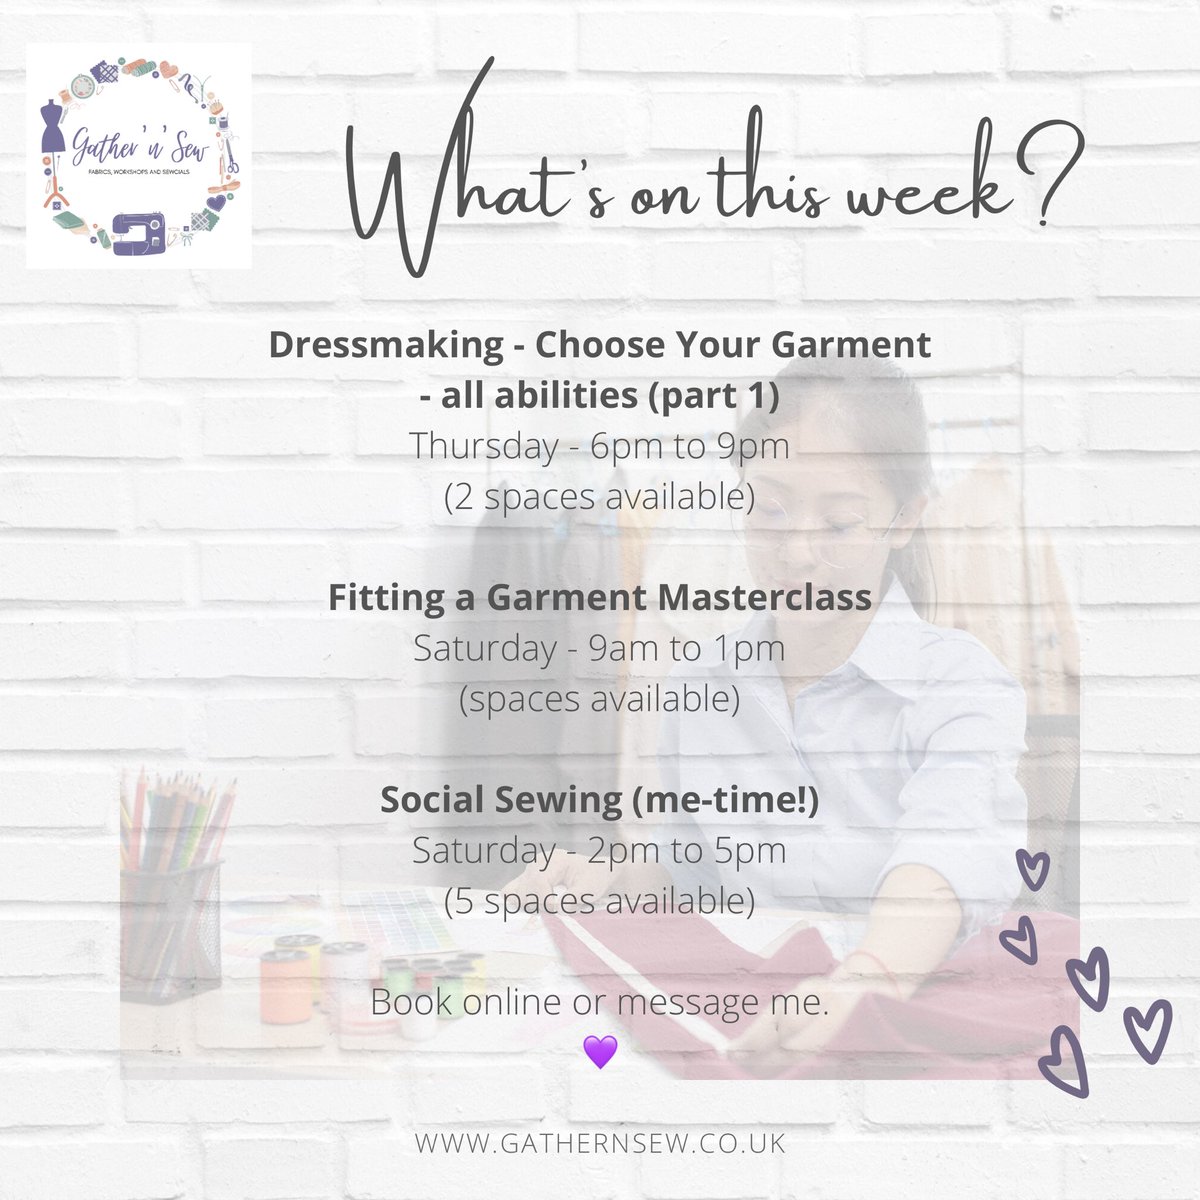 Whew!  It’s a busy week ahead. Still spaces on our workshops and late night shopping tonight. Join us for some fun 💜

#whatsonthisweek #gathernsew #learntosew #sewingclasses #sewingworkshops #bourne #bournetown #sewingparties #isew #isewmyownclothes #memade #memadewardrobe